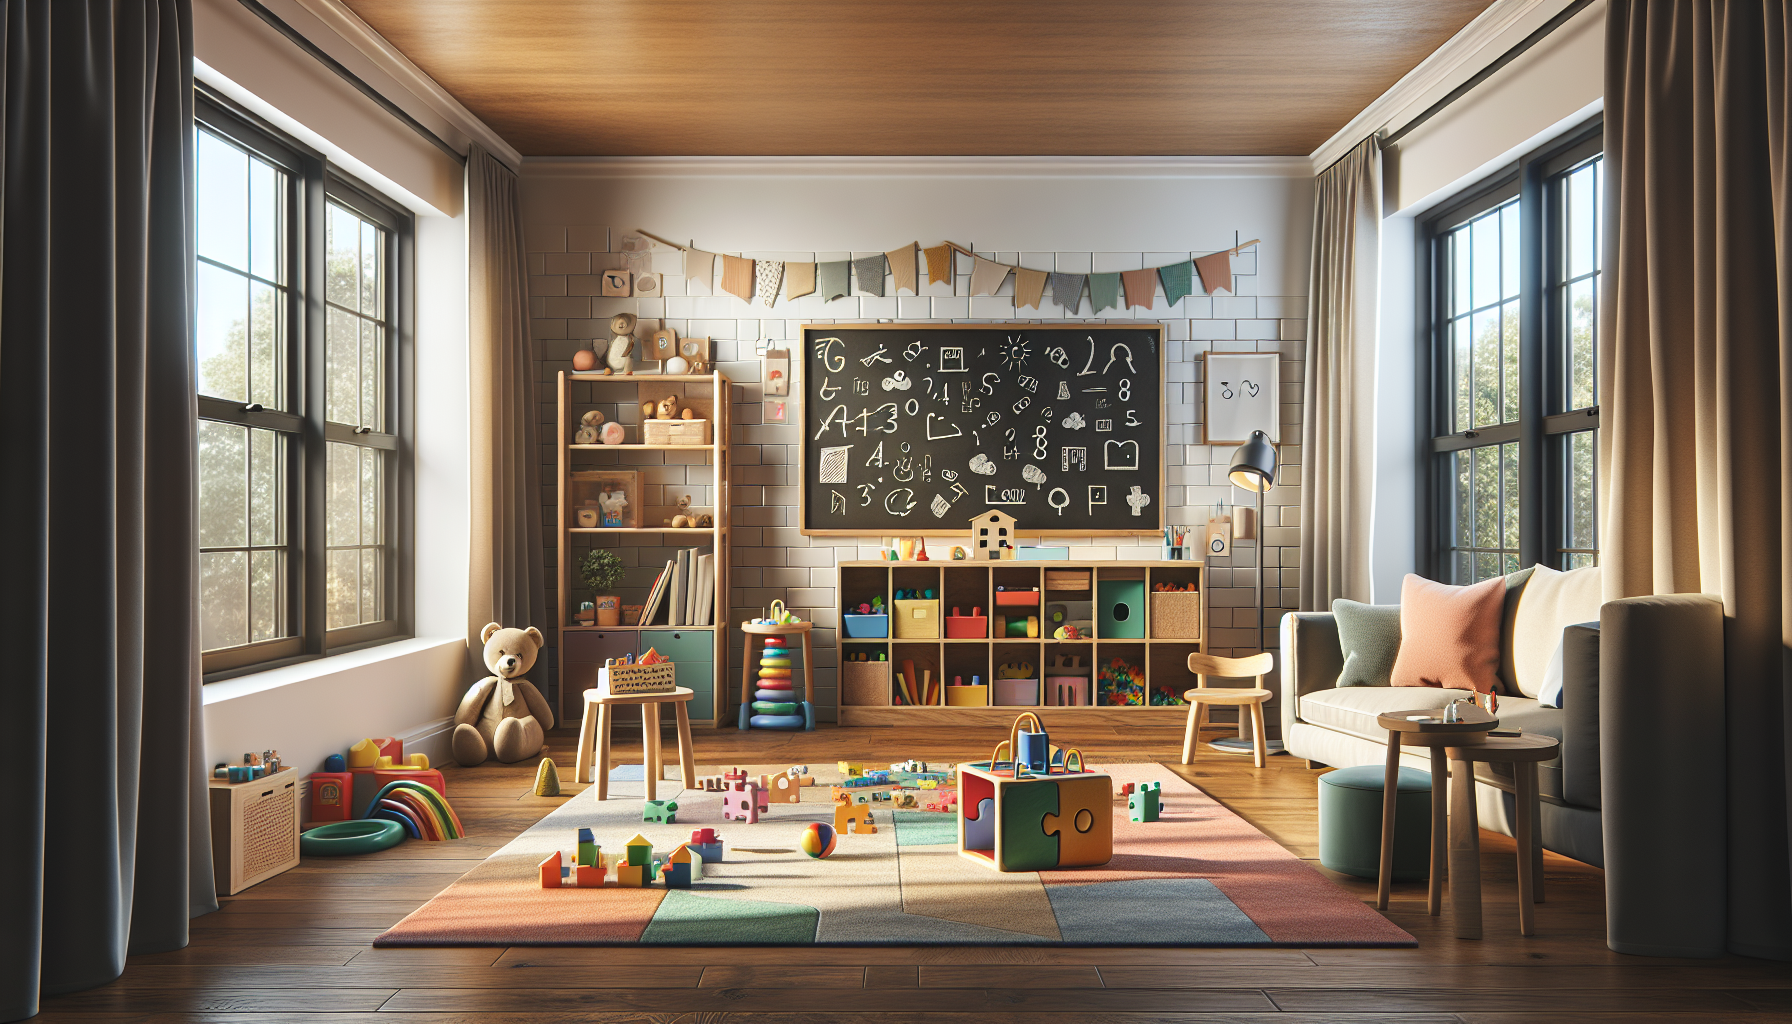 An empty playroom that is created by ai that is for an article on early autism intervention for black children and their parents.